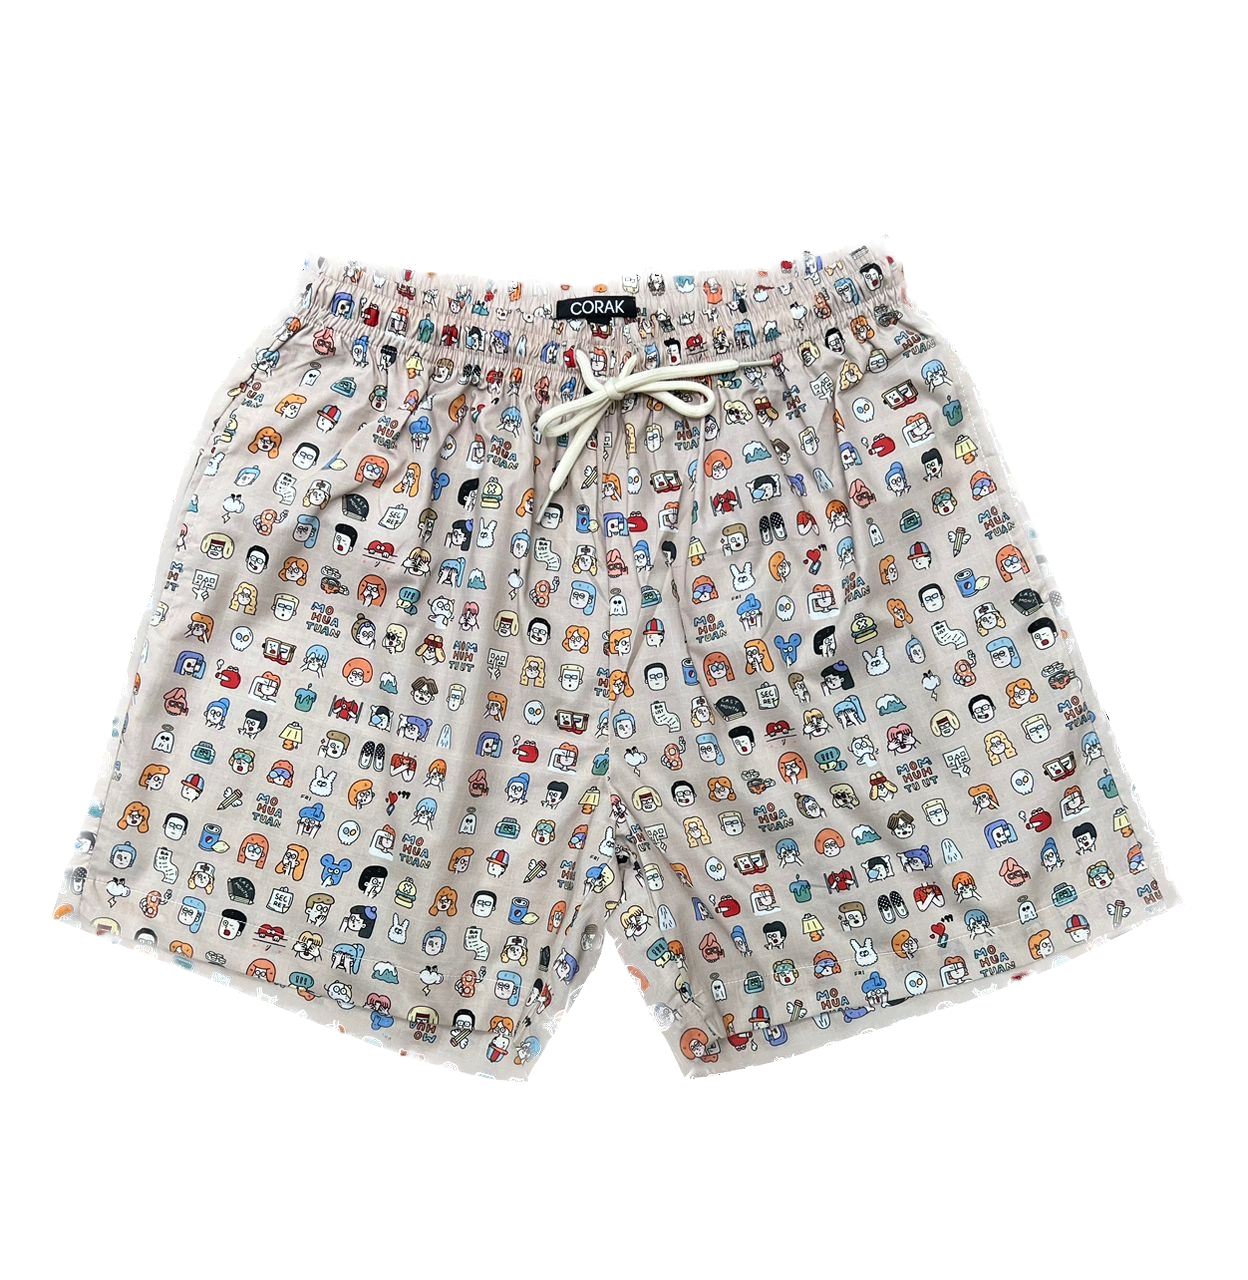 Funny Faces Shorts